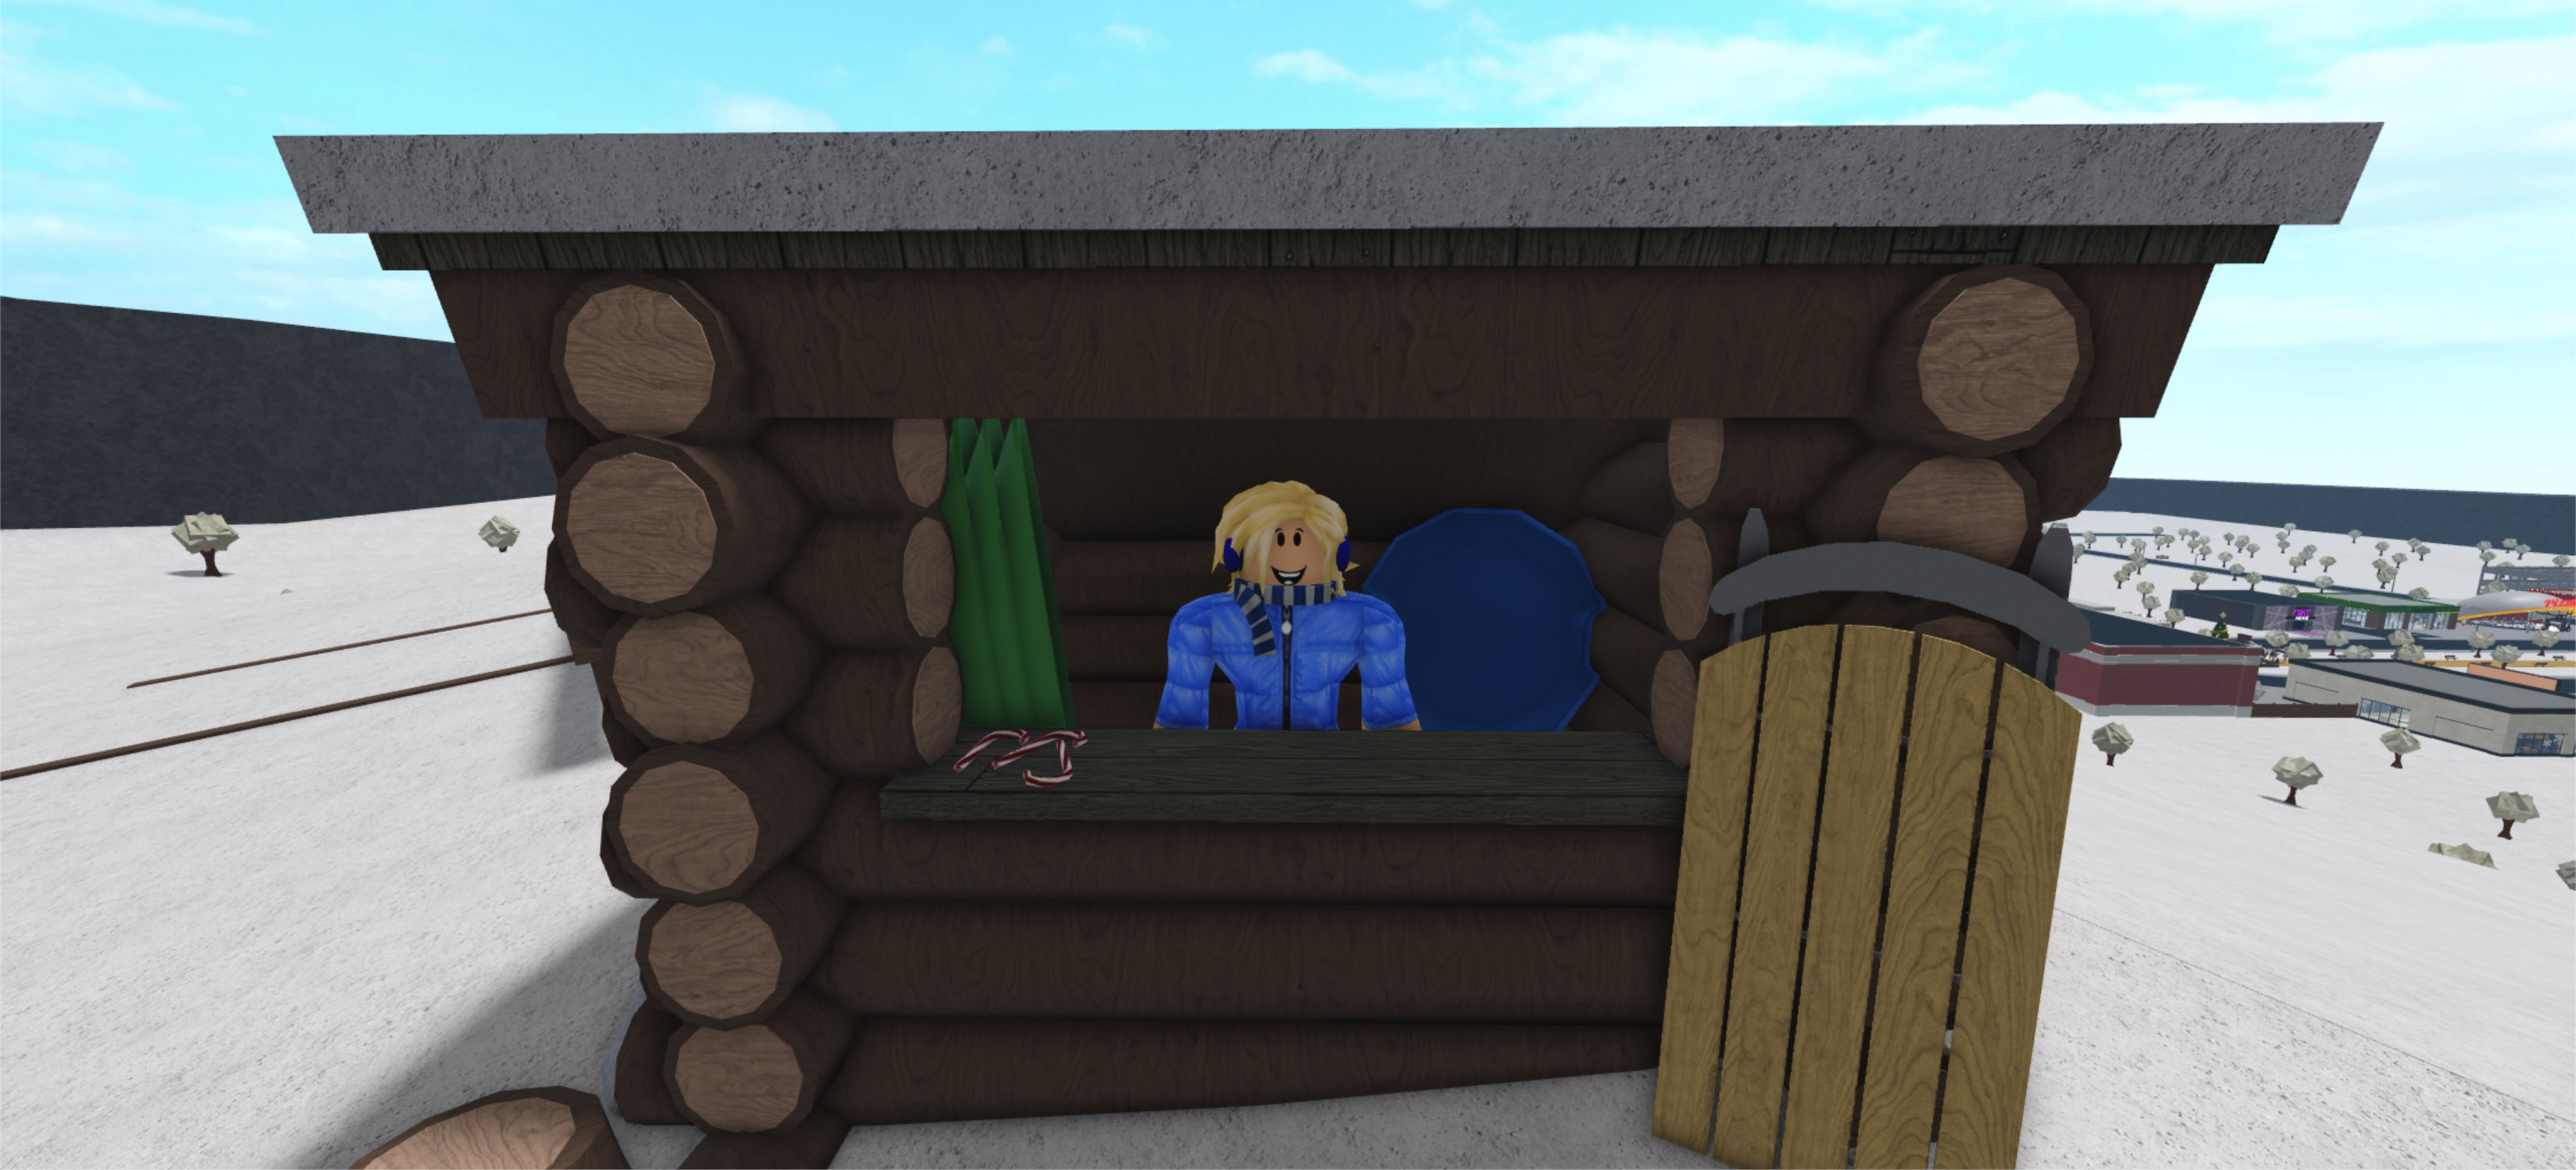 Bloxburg Updates! 🦃 on X: LEAKS! The official bloxburg Twitter,  @heybloxburg has posted what looks like aliens next to the ice cream stand!  There are also weird stands in front of the